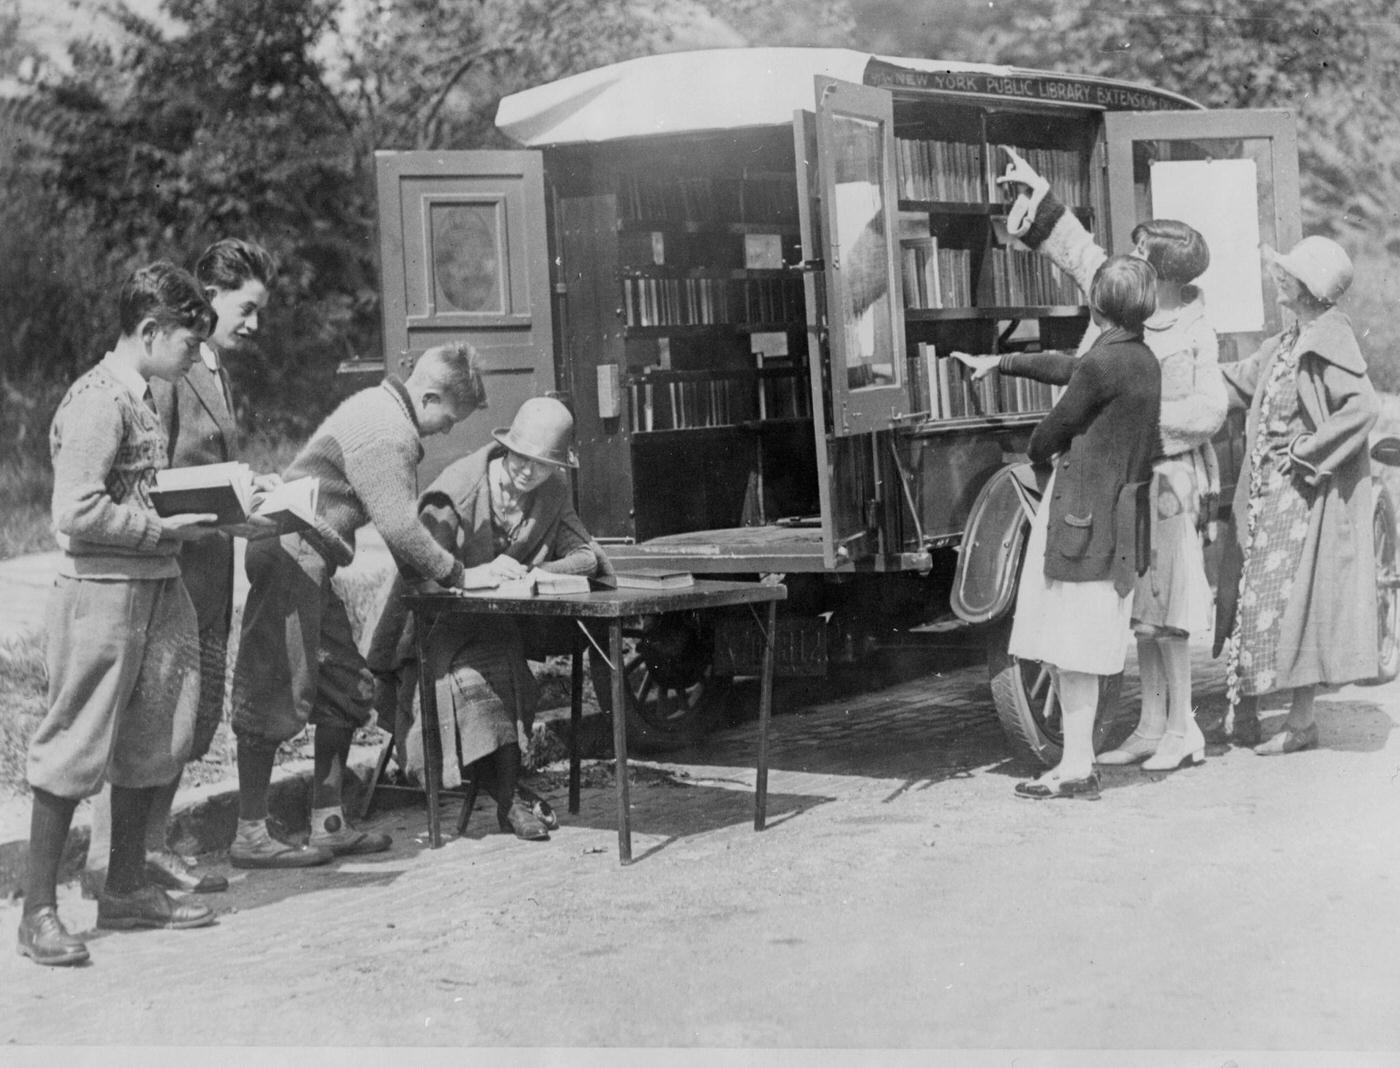 A Mobile New York Public Library Unit Parked On A Staten Island Street For Locals To Browse Books.